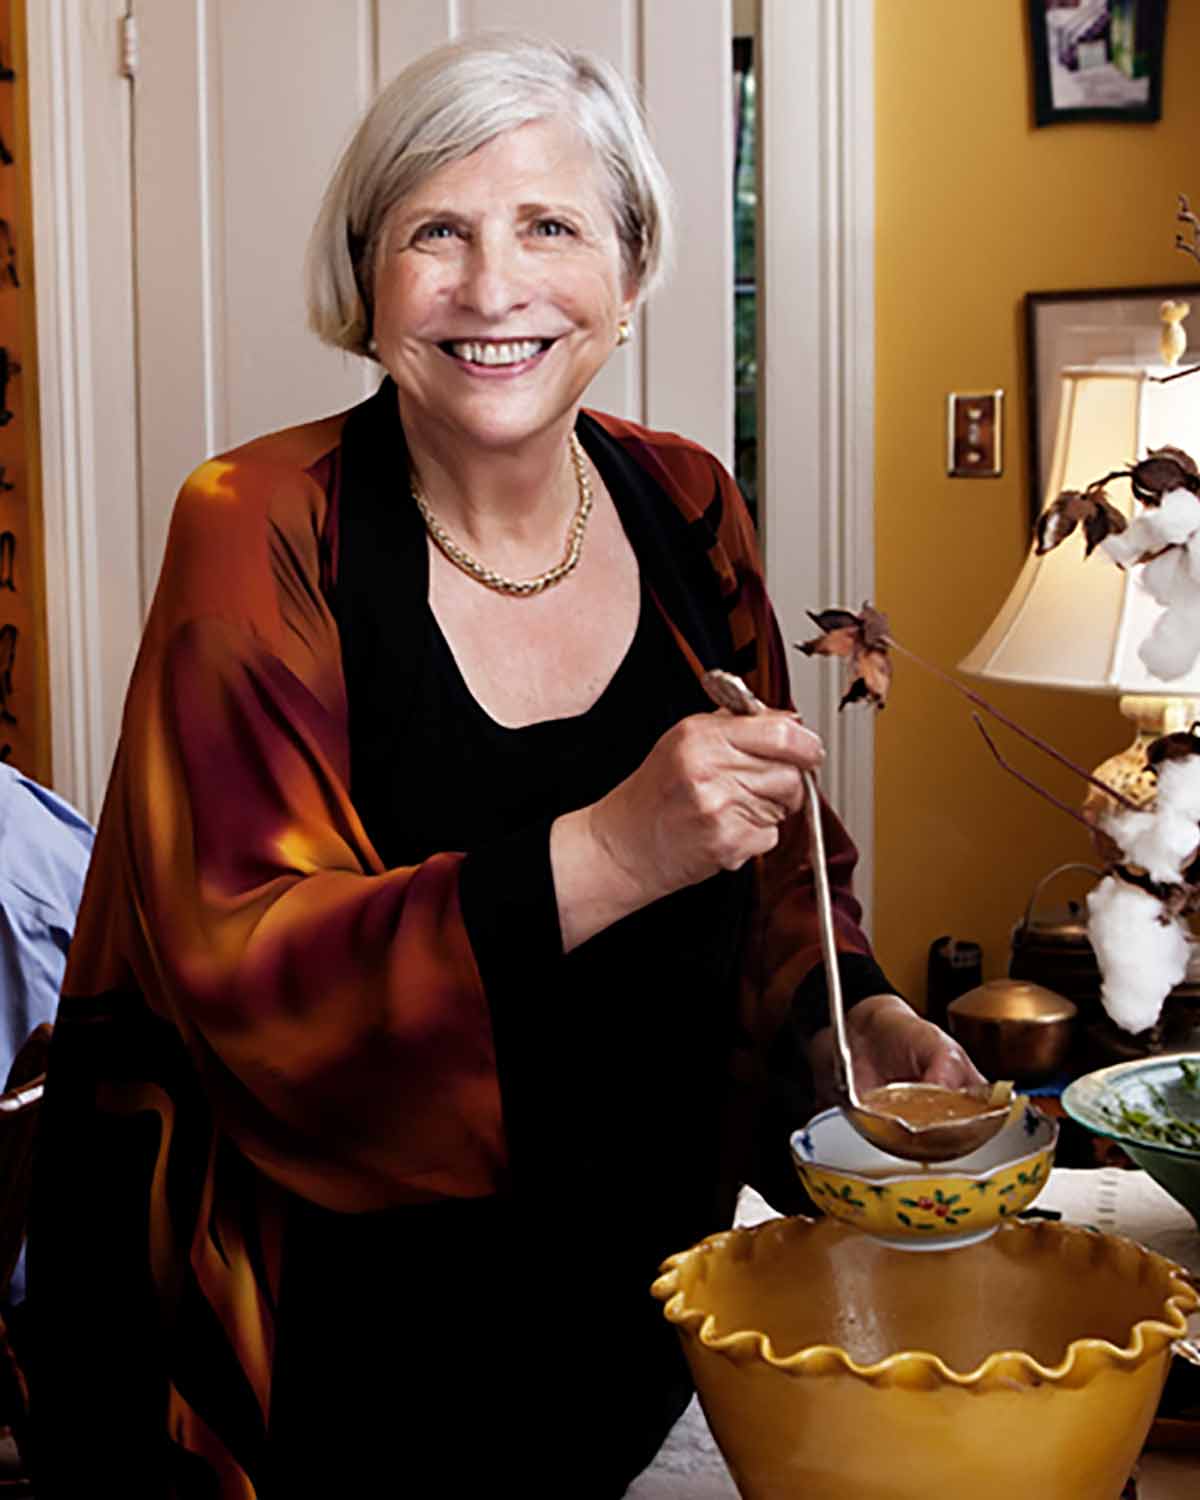 A photo of Nathalie Dupree ladling soup into a bowl.